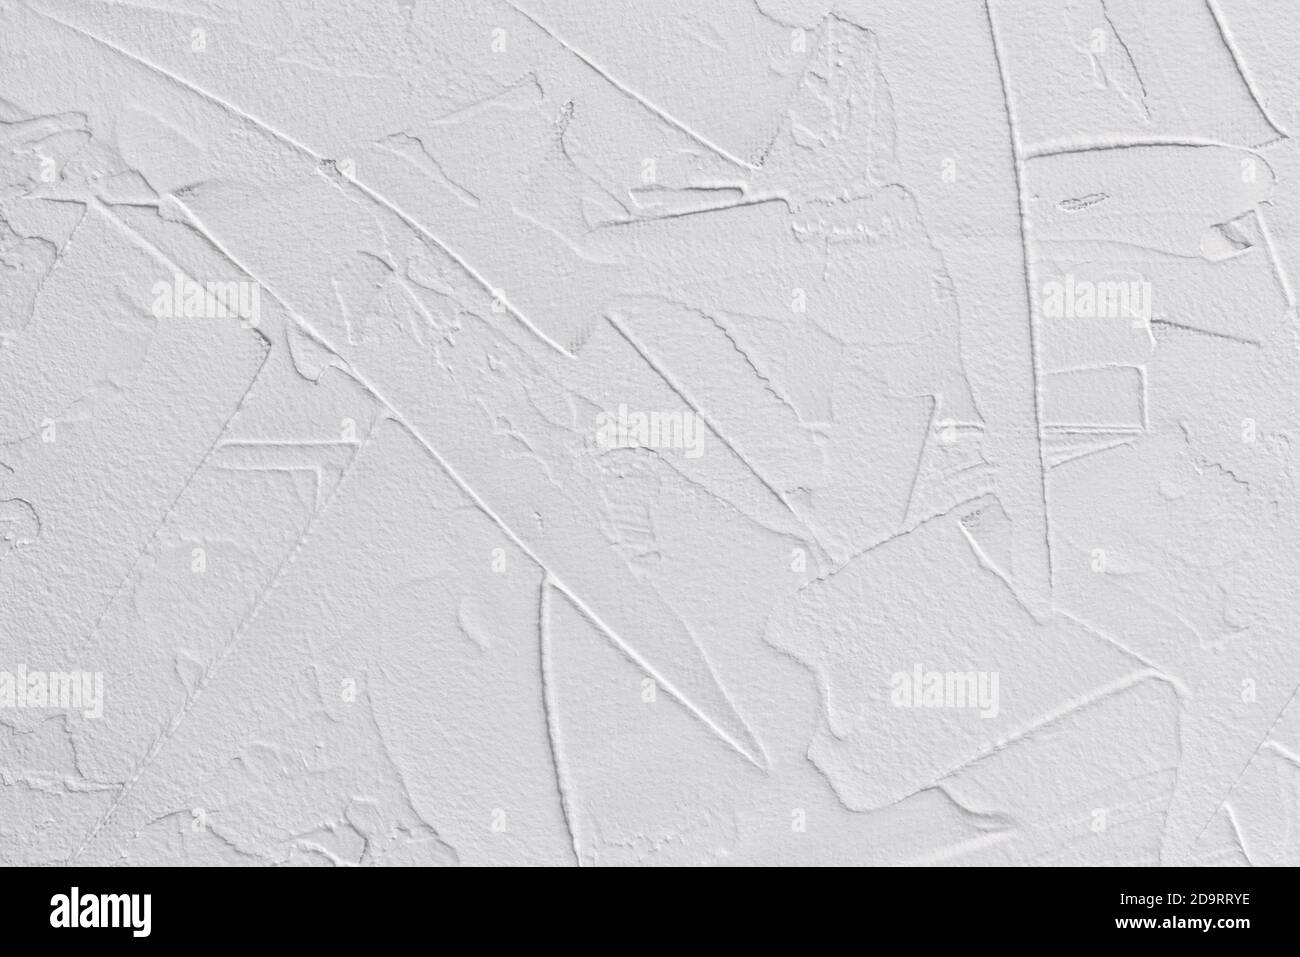 white textured background of filler paste applied with putty knife in irregular dashes and strokes Stock Photo